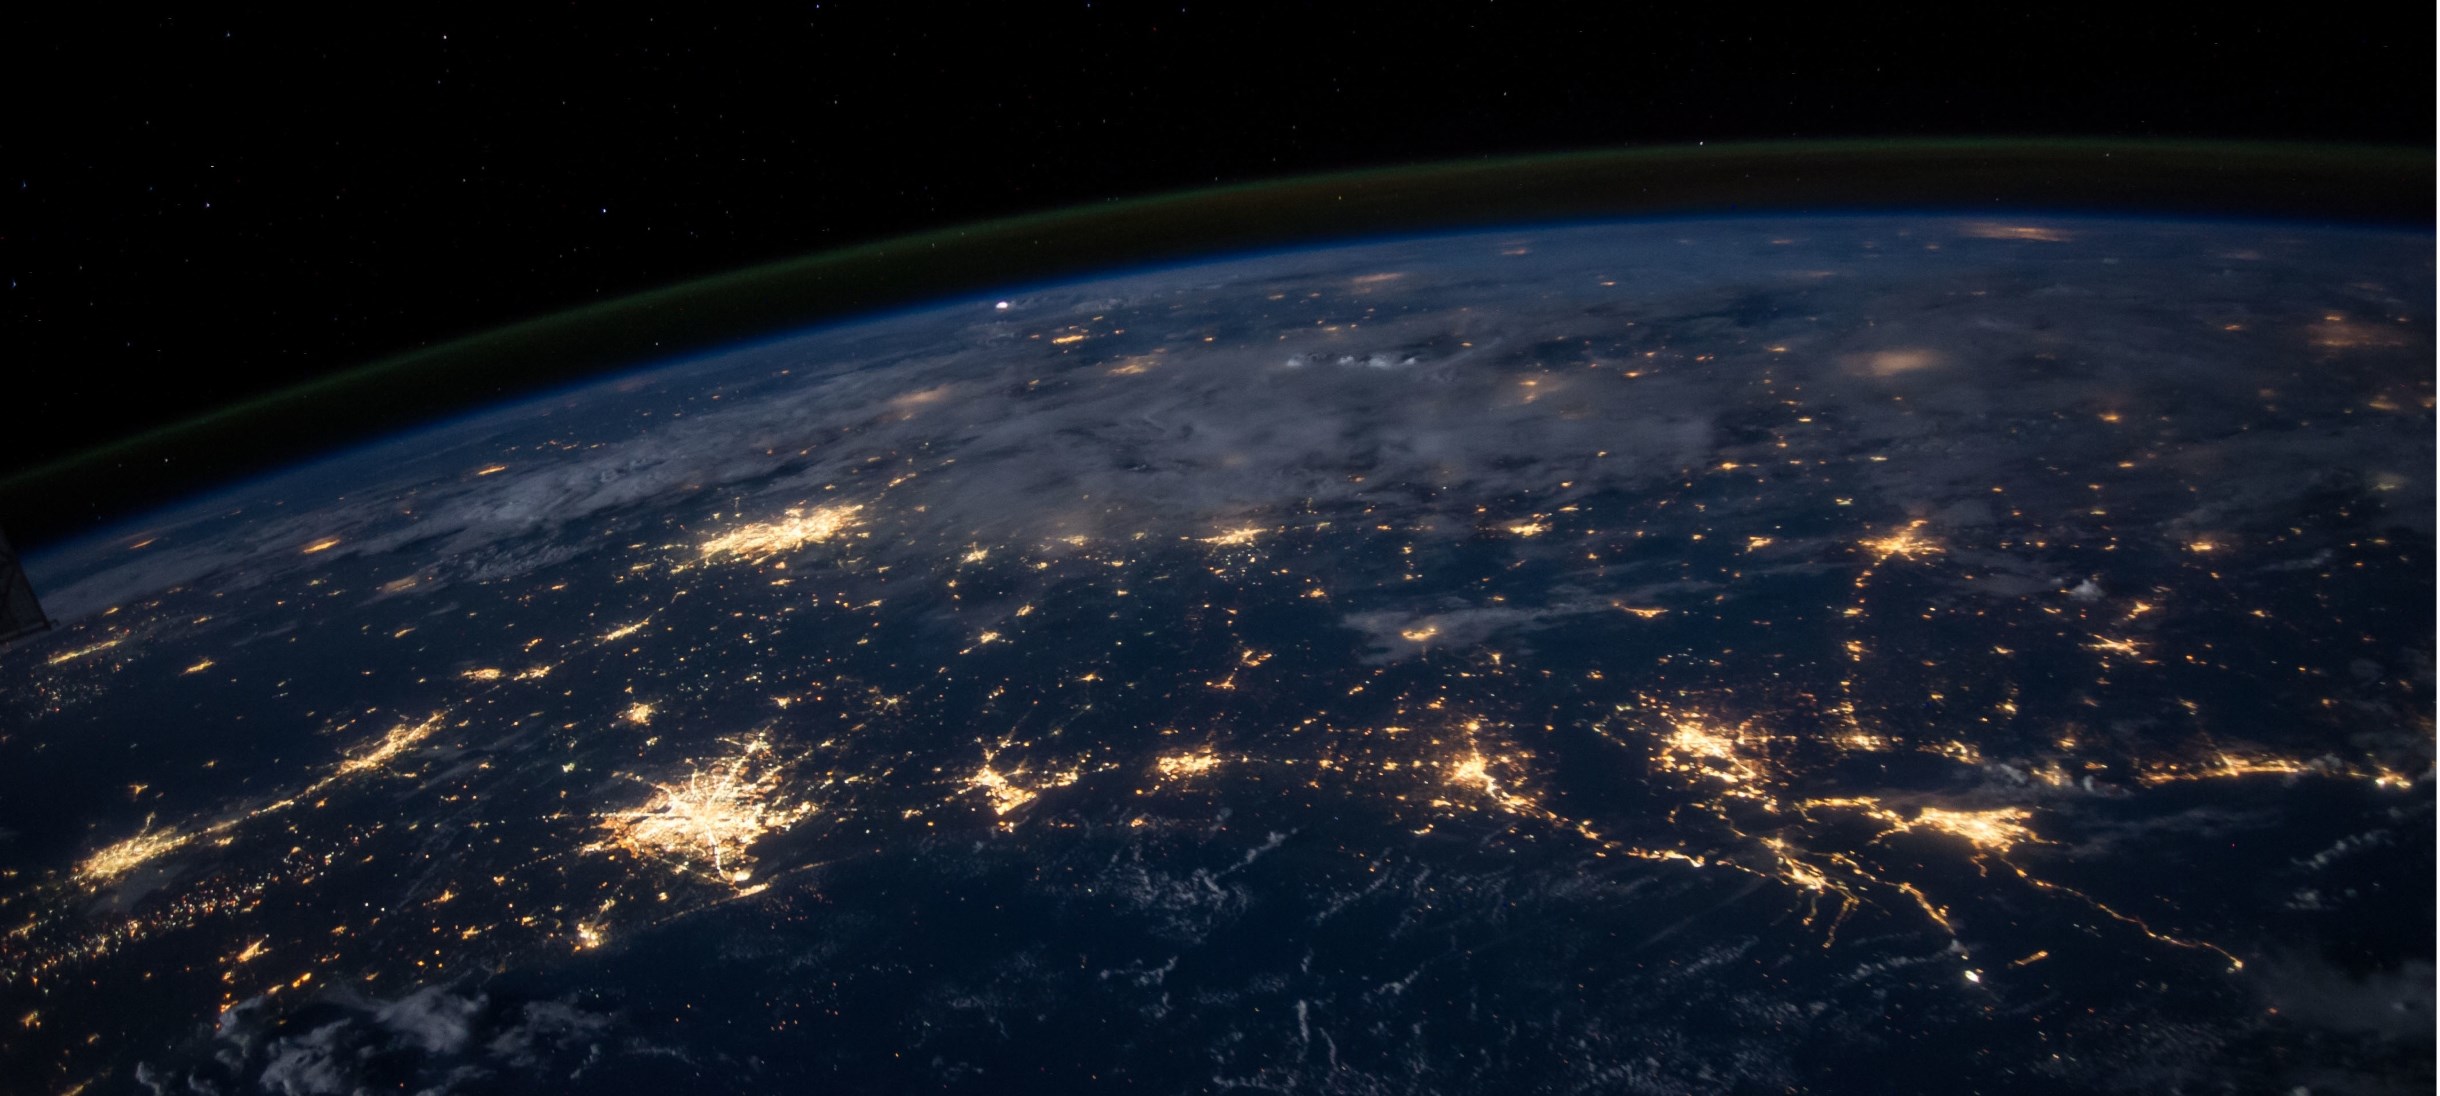 Nighttime view of Earth from space